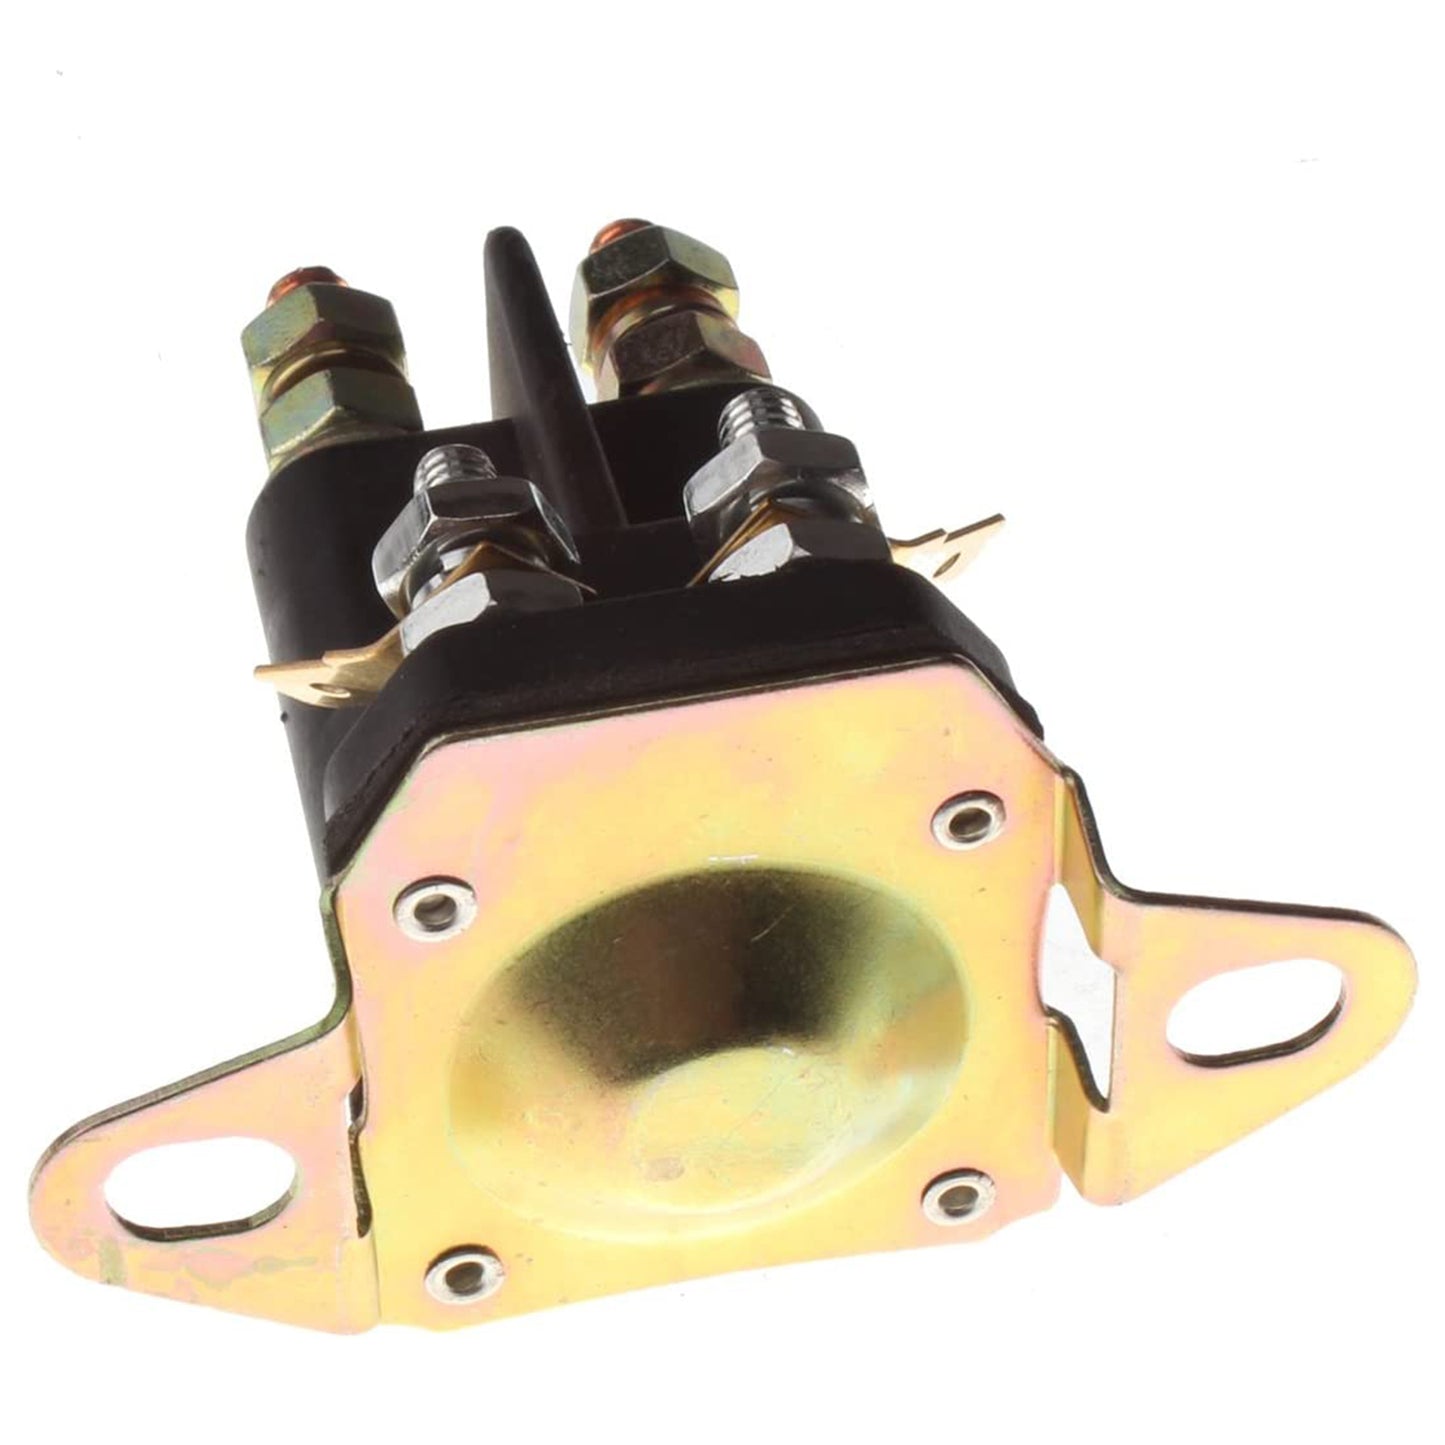 2654 532146154 Solenoid 4-Pole Compatible with Husqvarna Poulan Roper Craftsman Weed Eater AYP